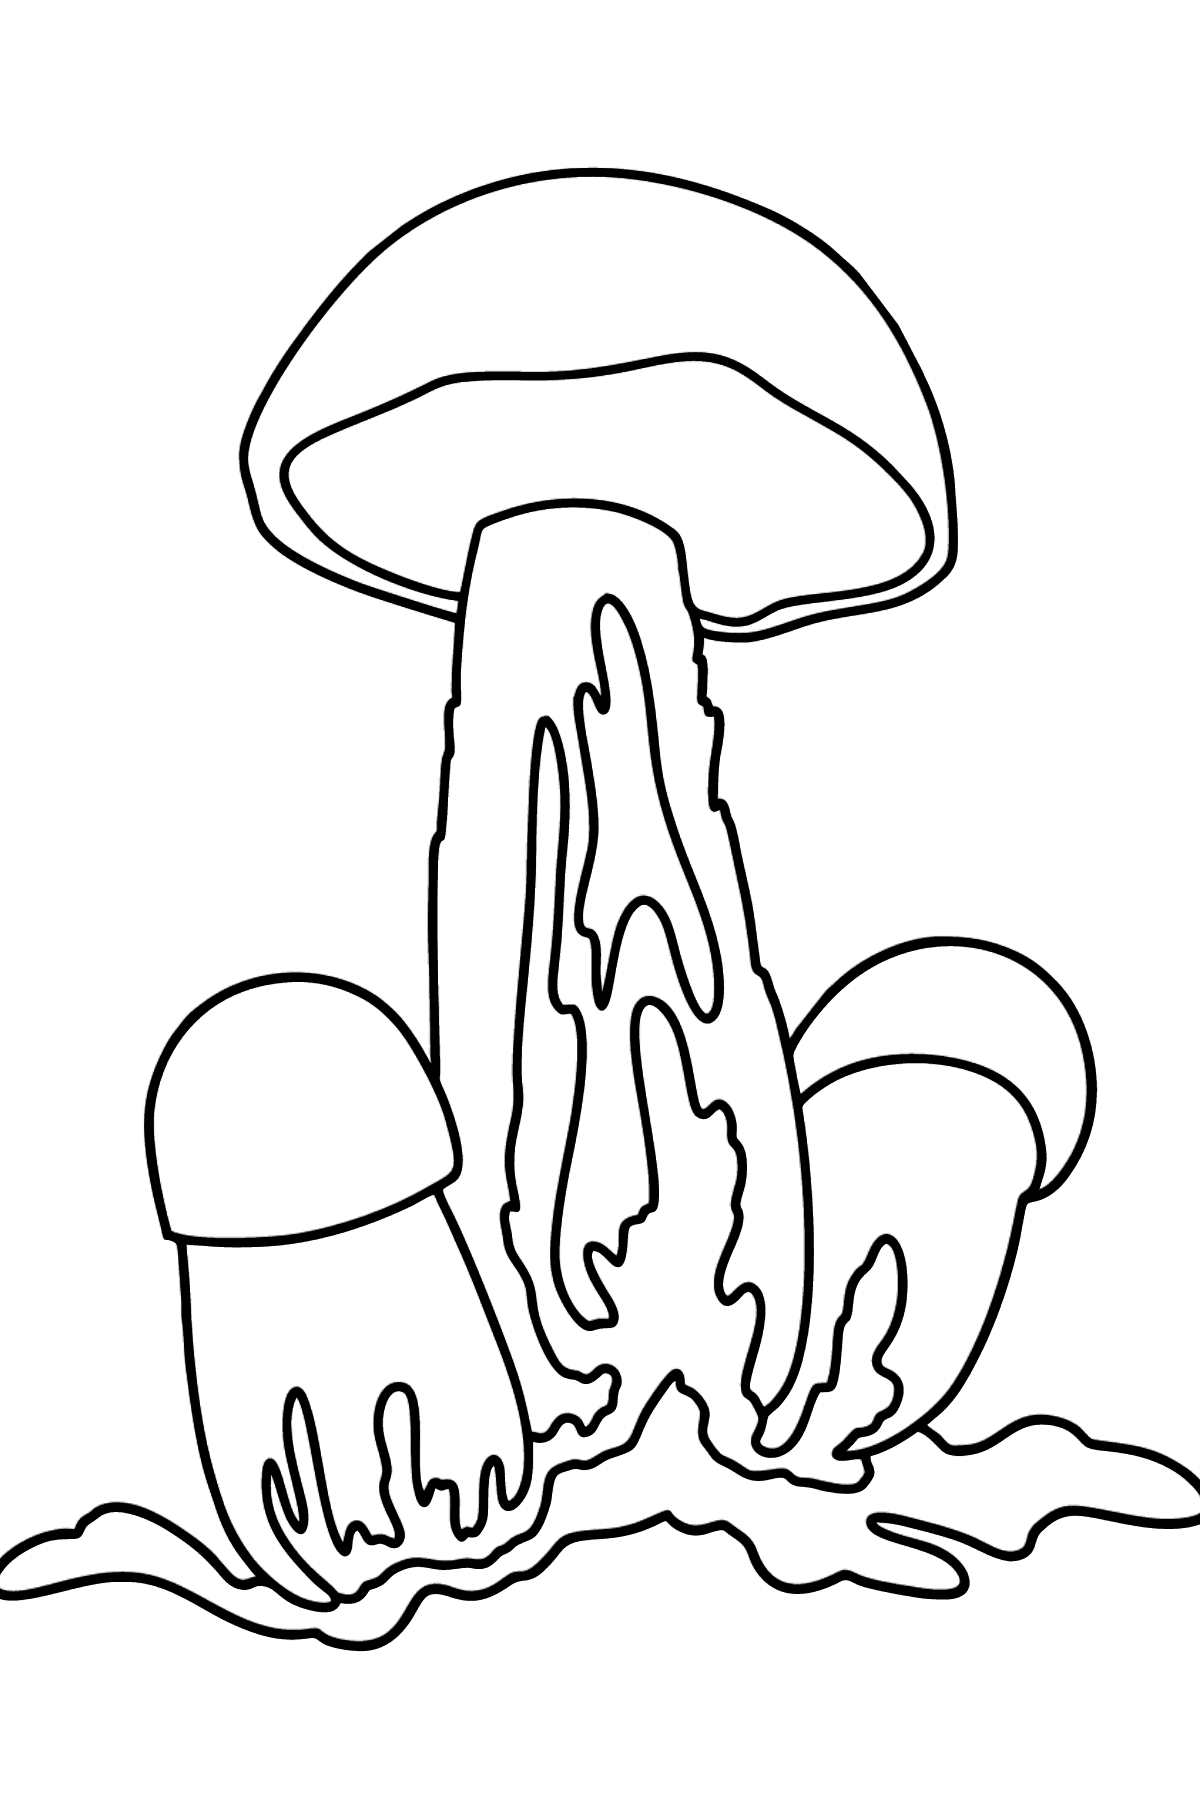 Orange-cap boletus coloring page - Coloring Pages for Kids